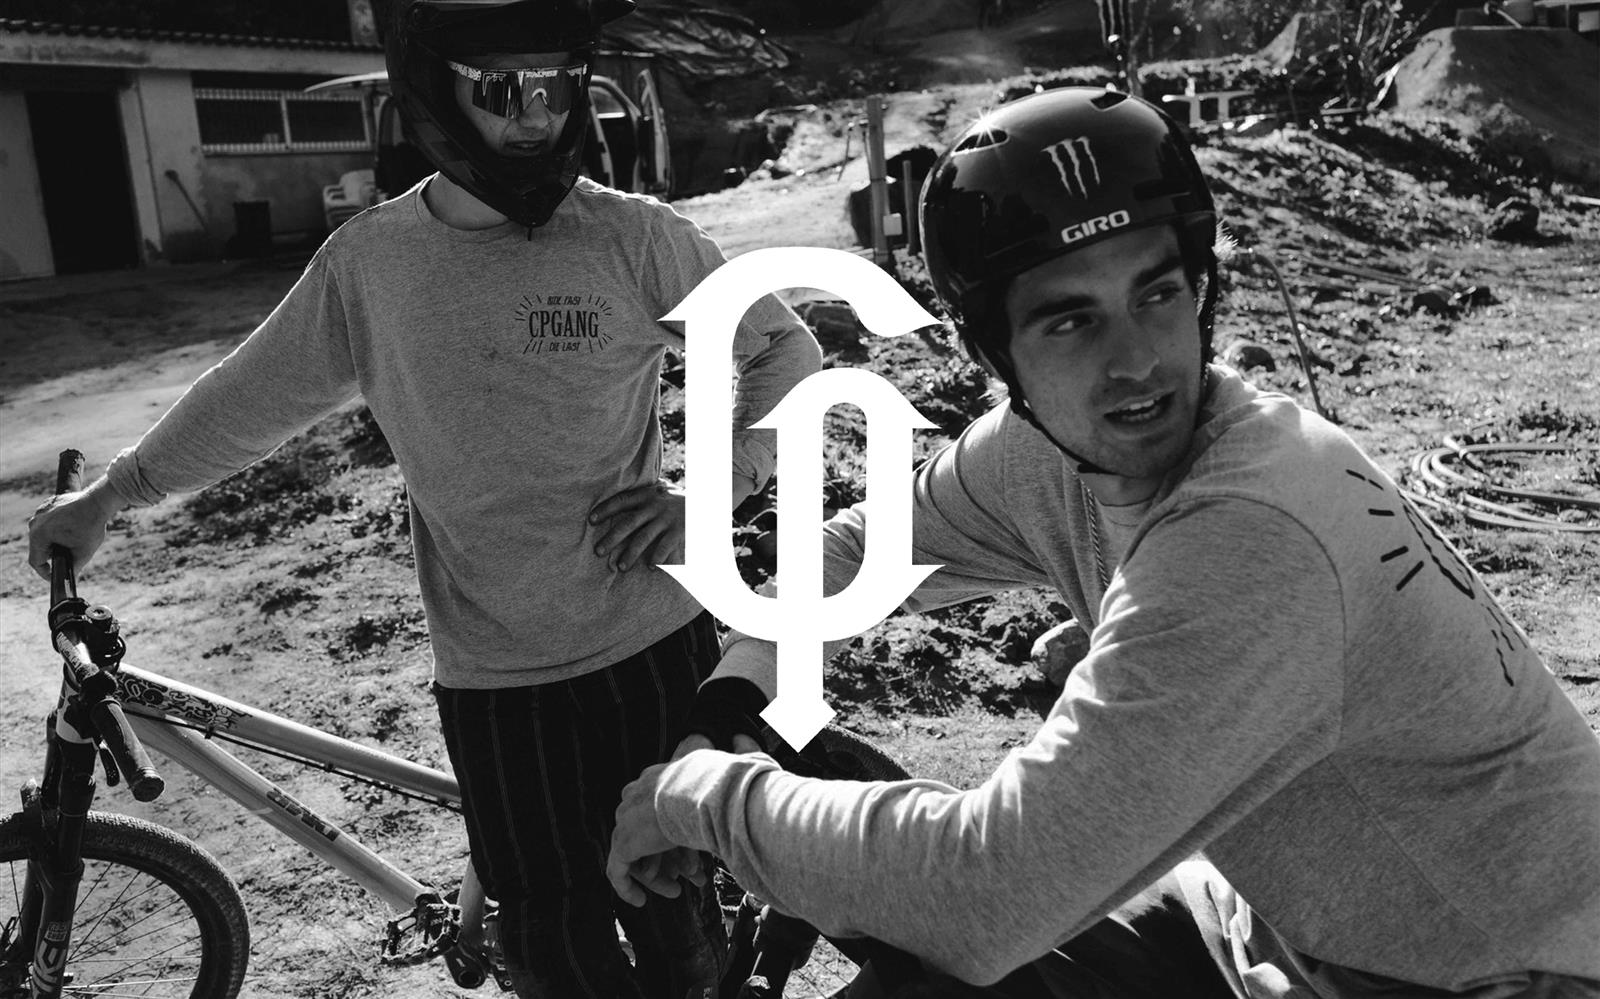 CPGANG exclusive apparel for trail riding